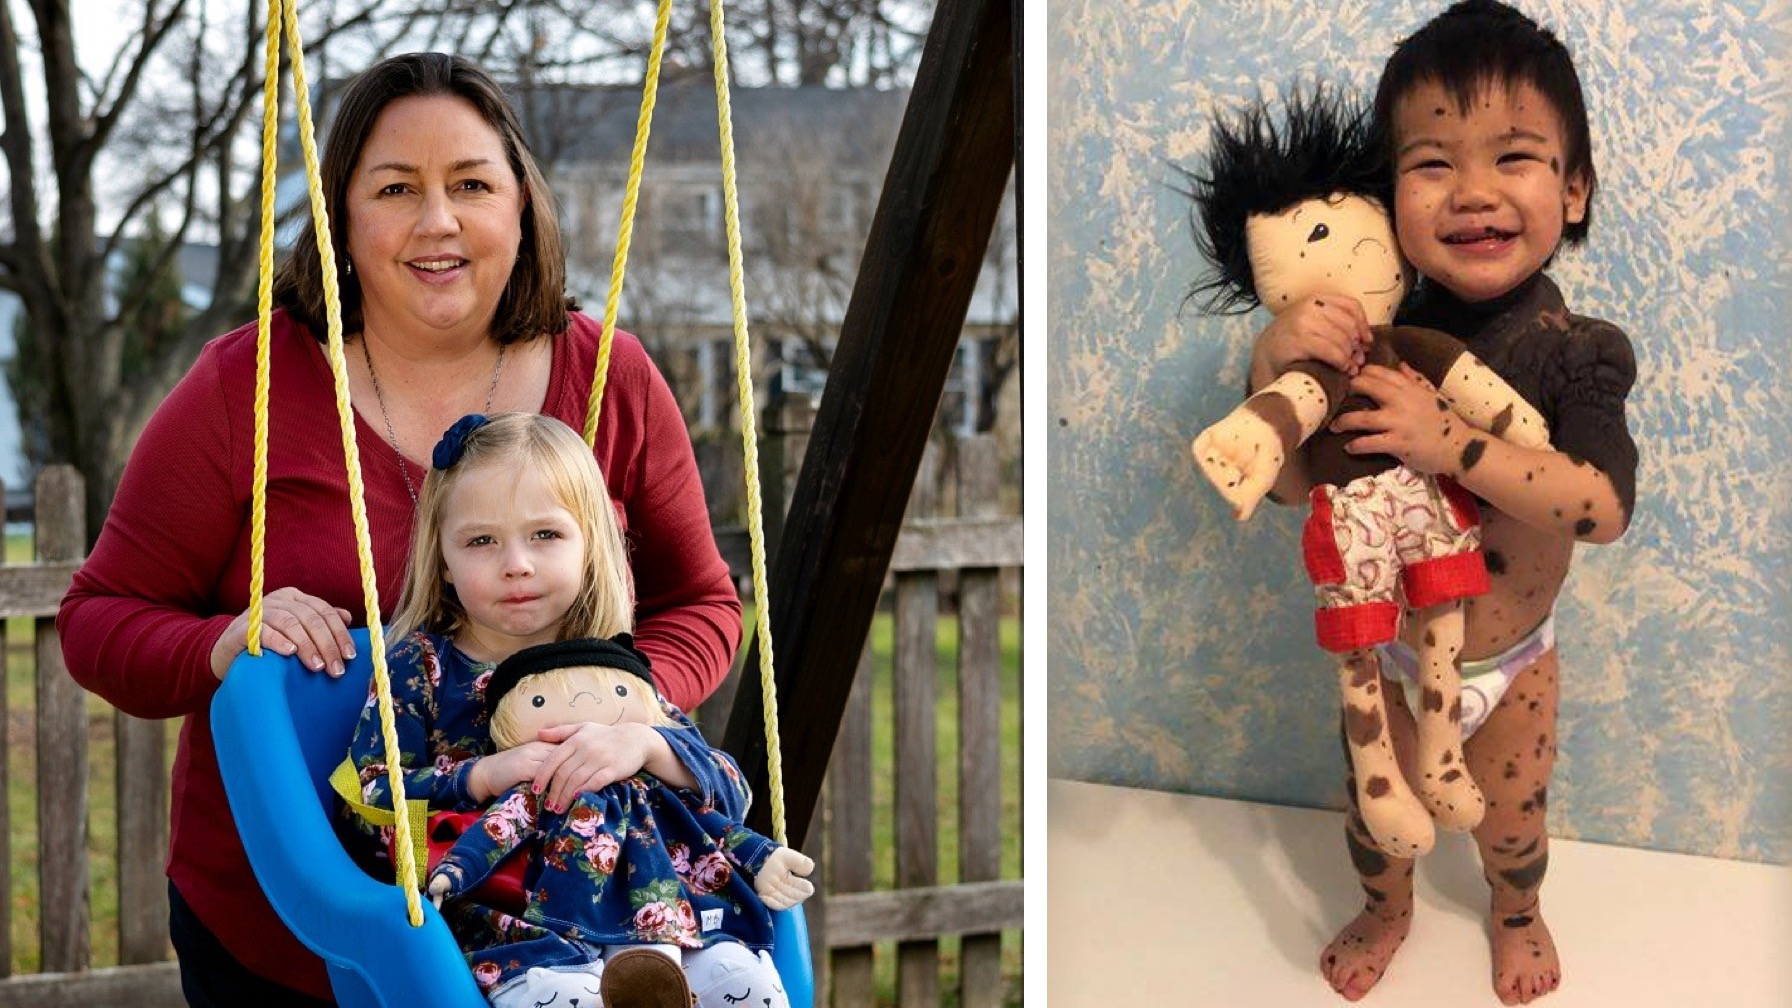 Woman Custom-Makes Dolls to Match Children With Physical Differences